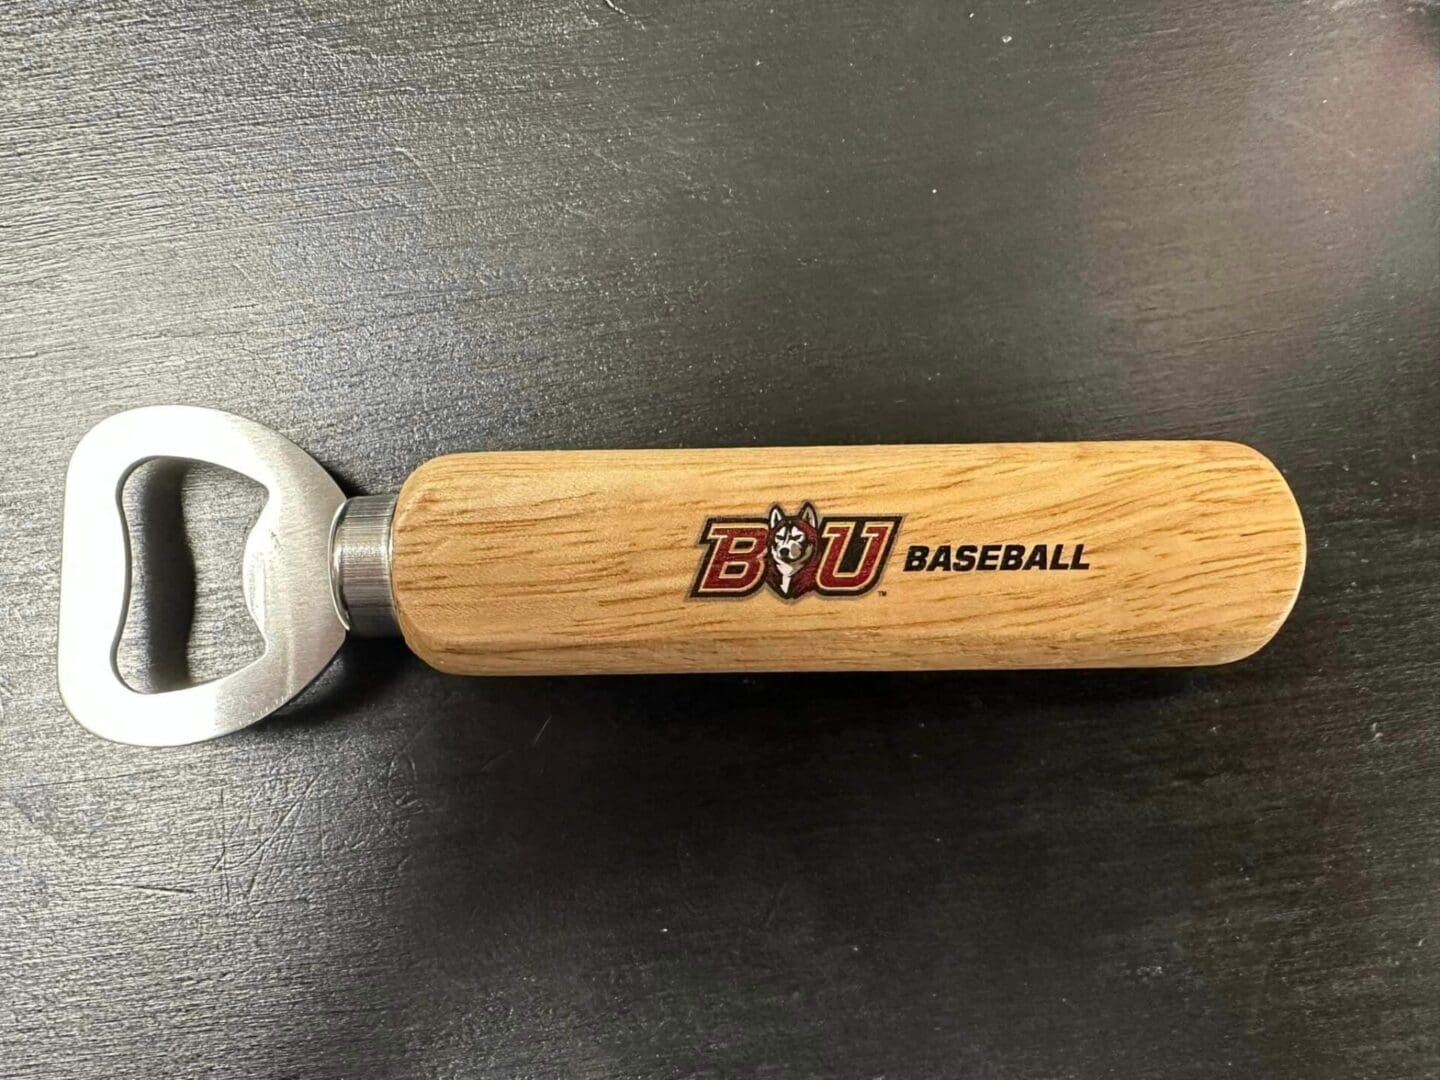 A wooden bottle opener with the baseball logo on it.